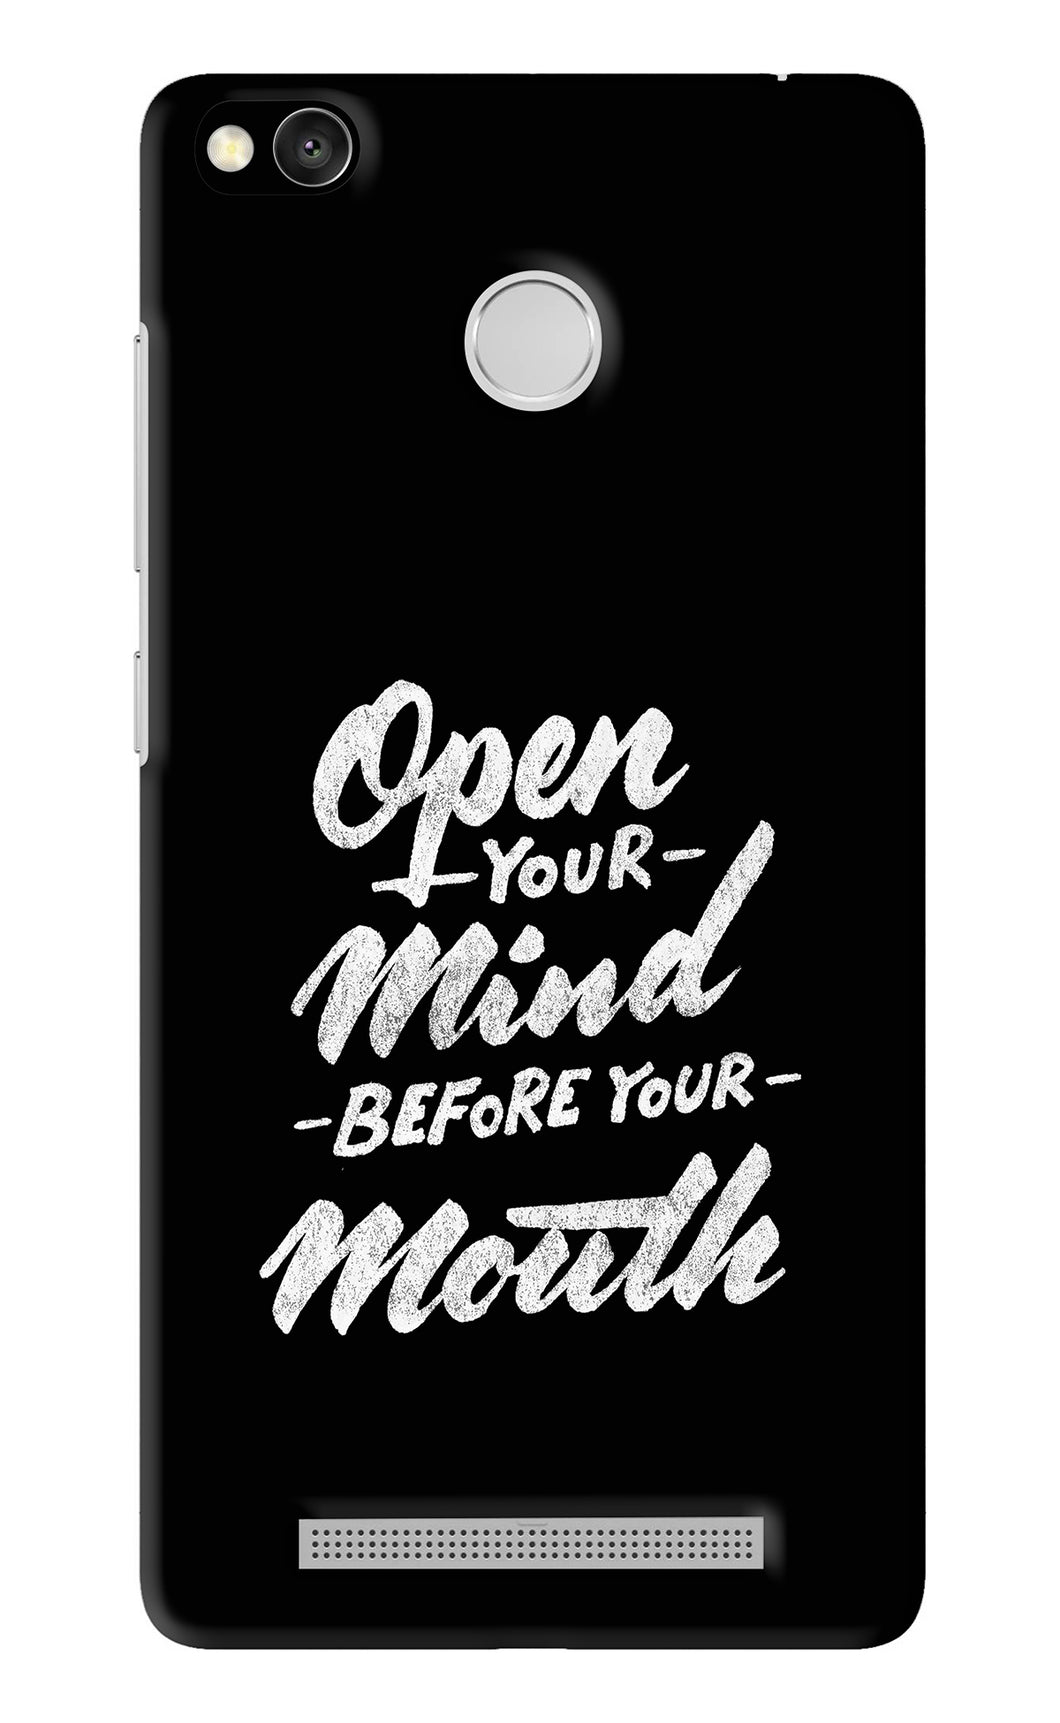 Open Your Mind Before Your Mouth Xiaomi Redmi 3S Prime Back Skin Wrap